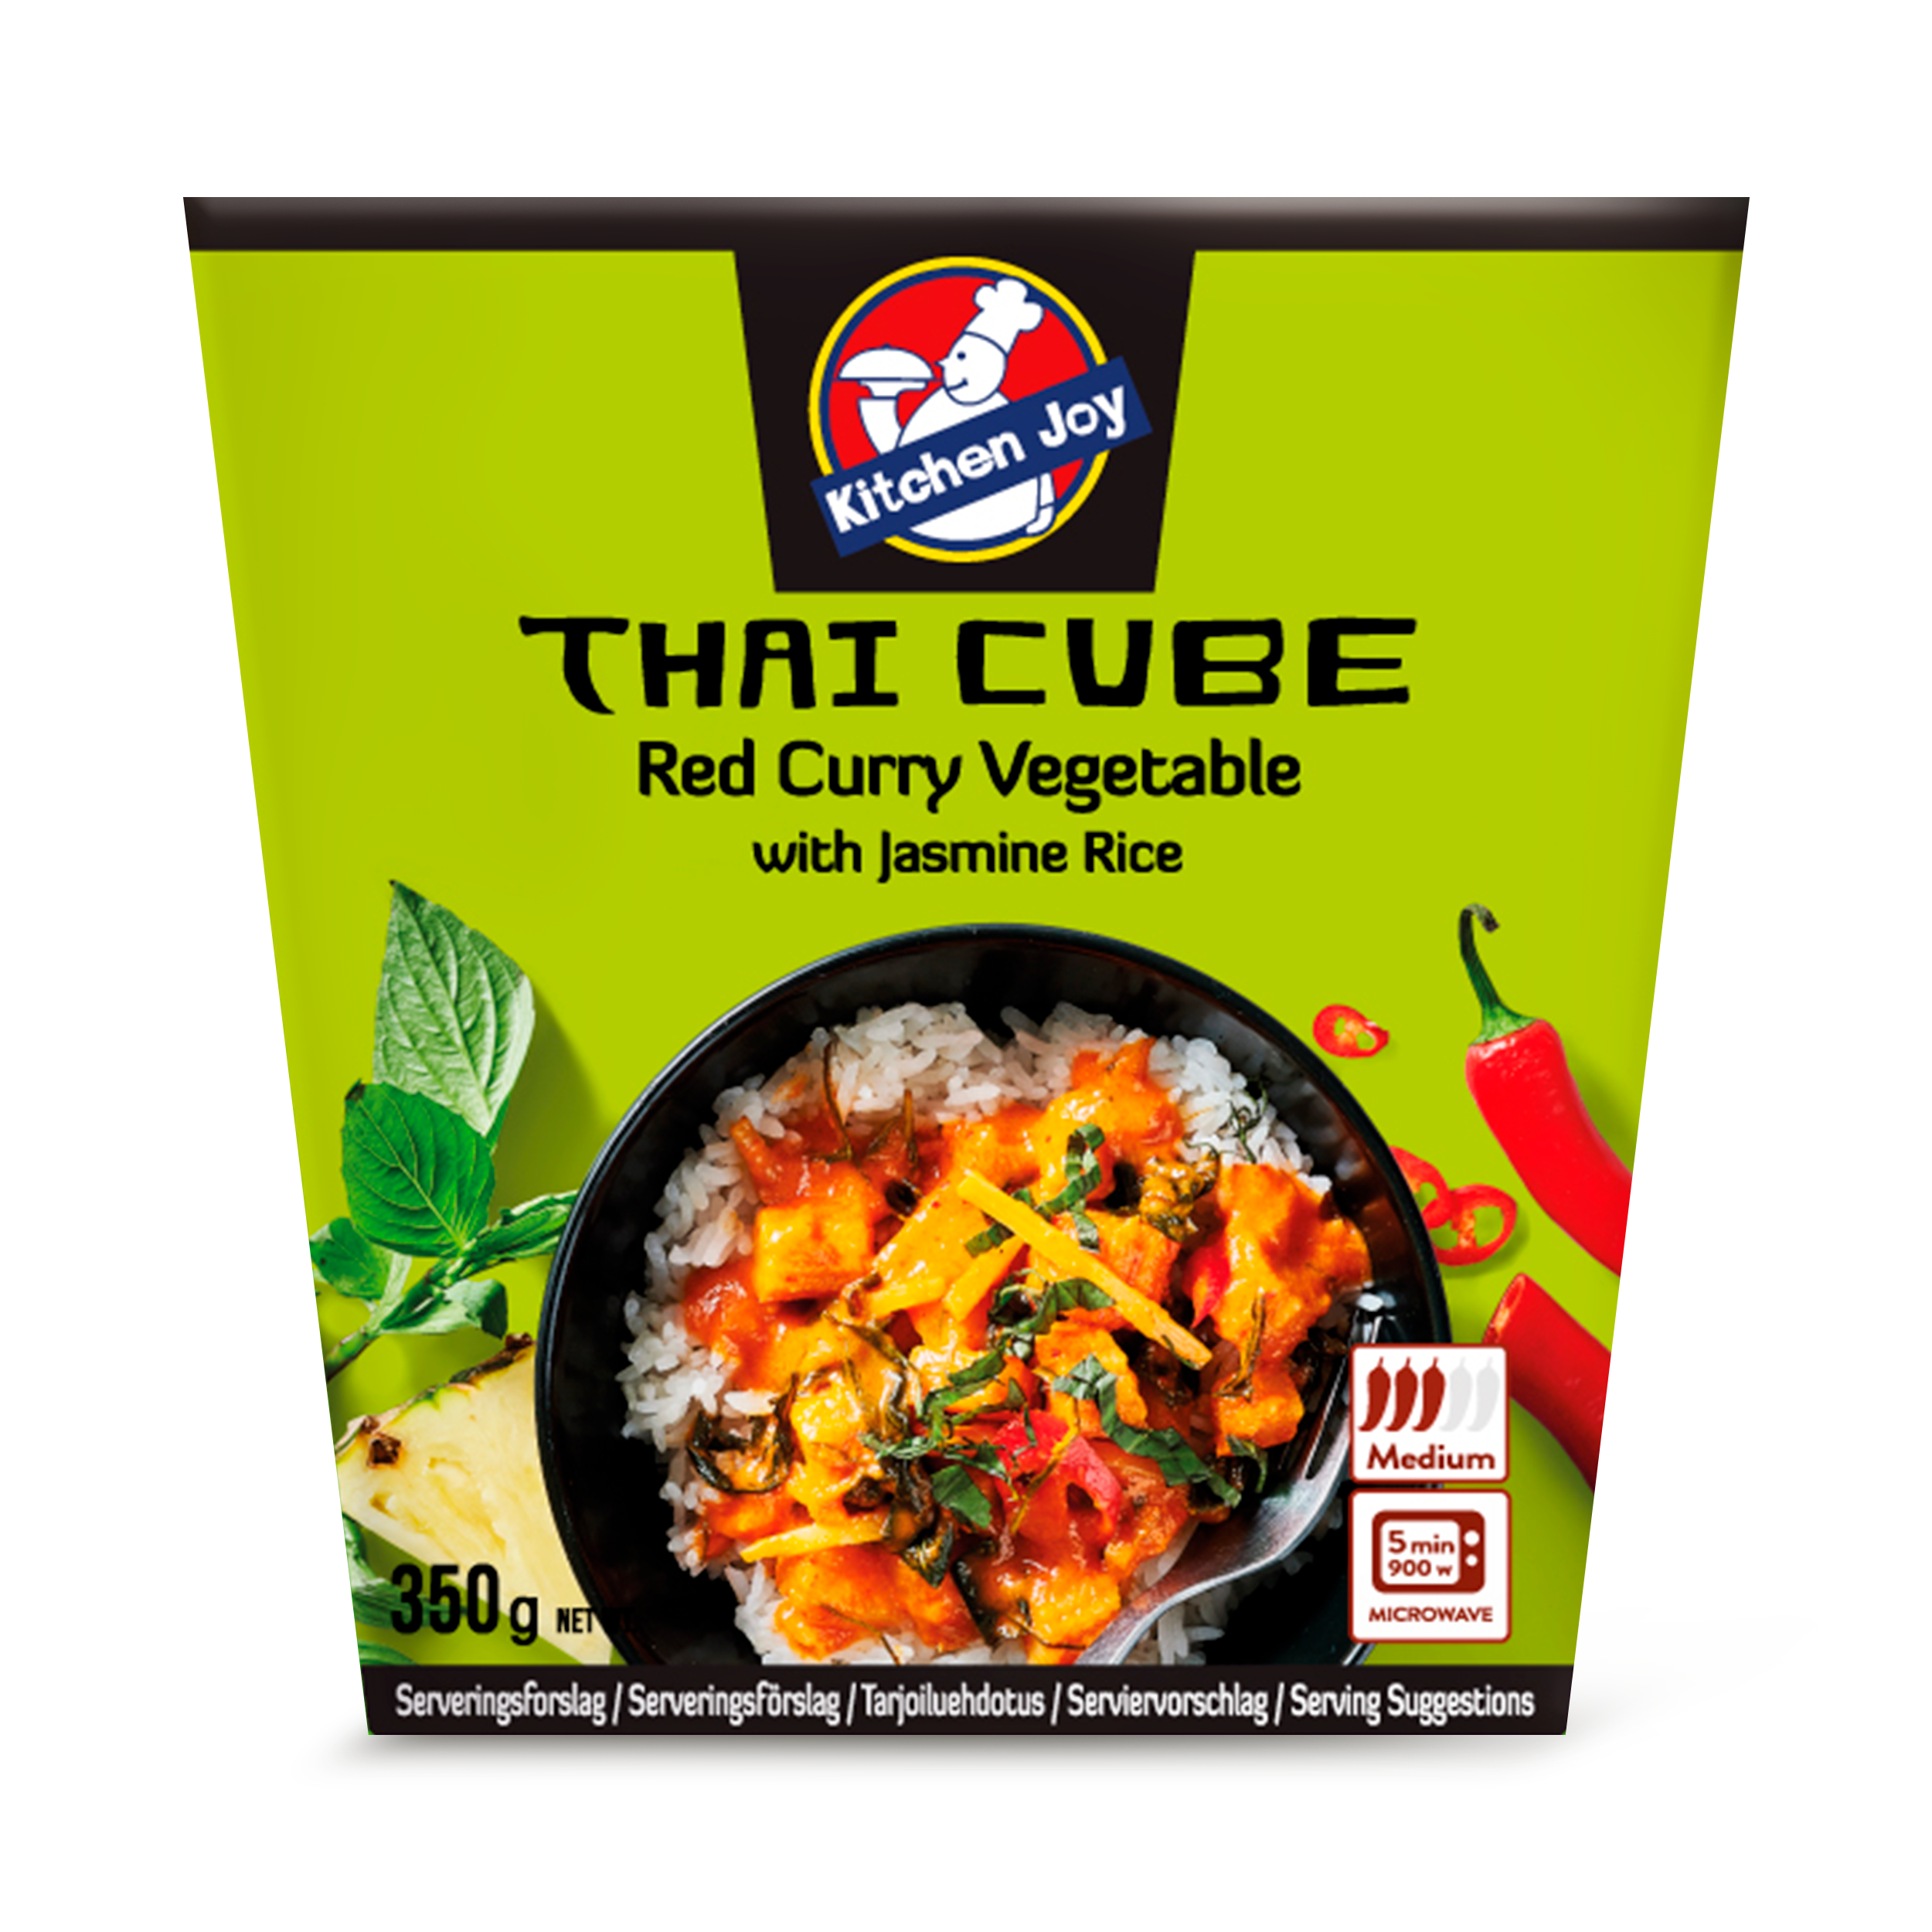 Kitchen joy Thai Cube Red Curry Vegetable Review